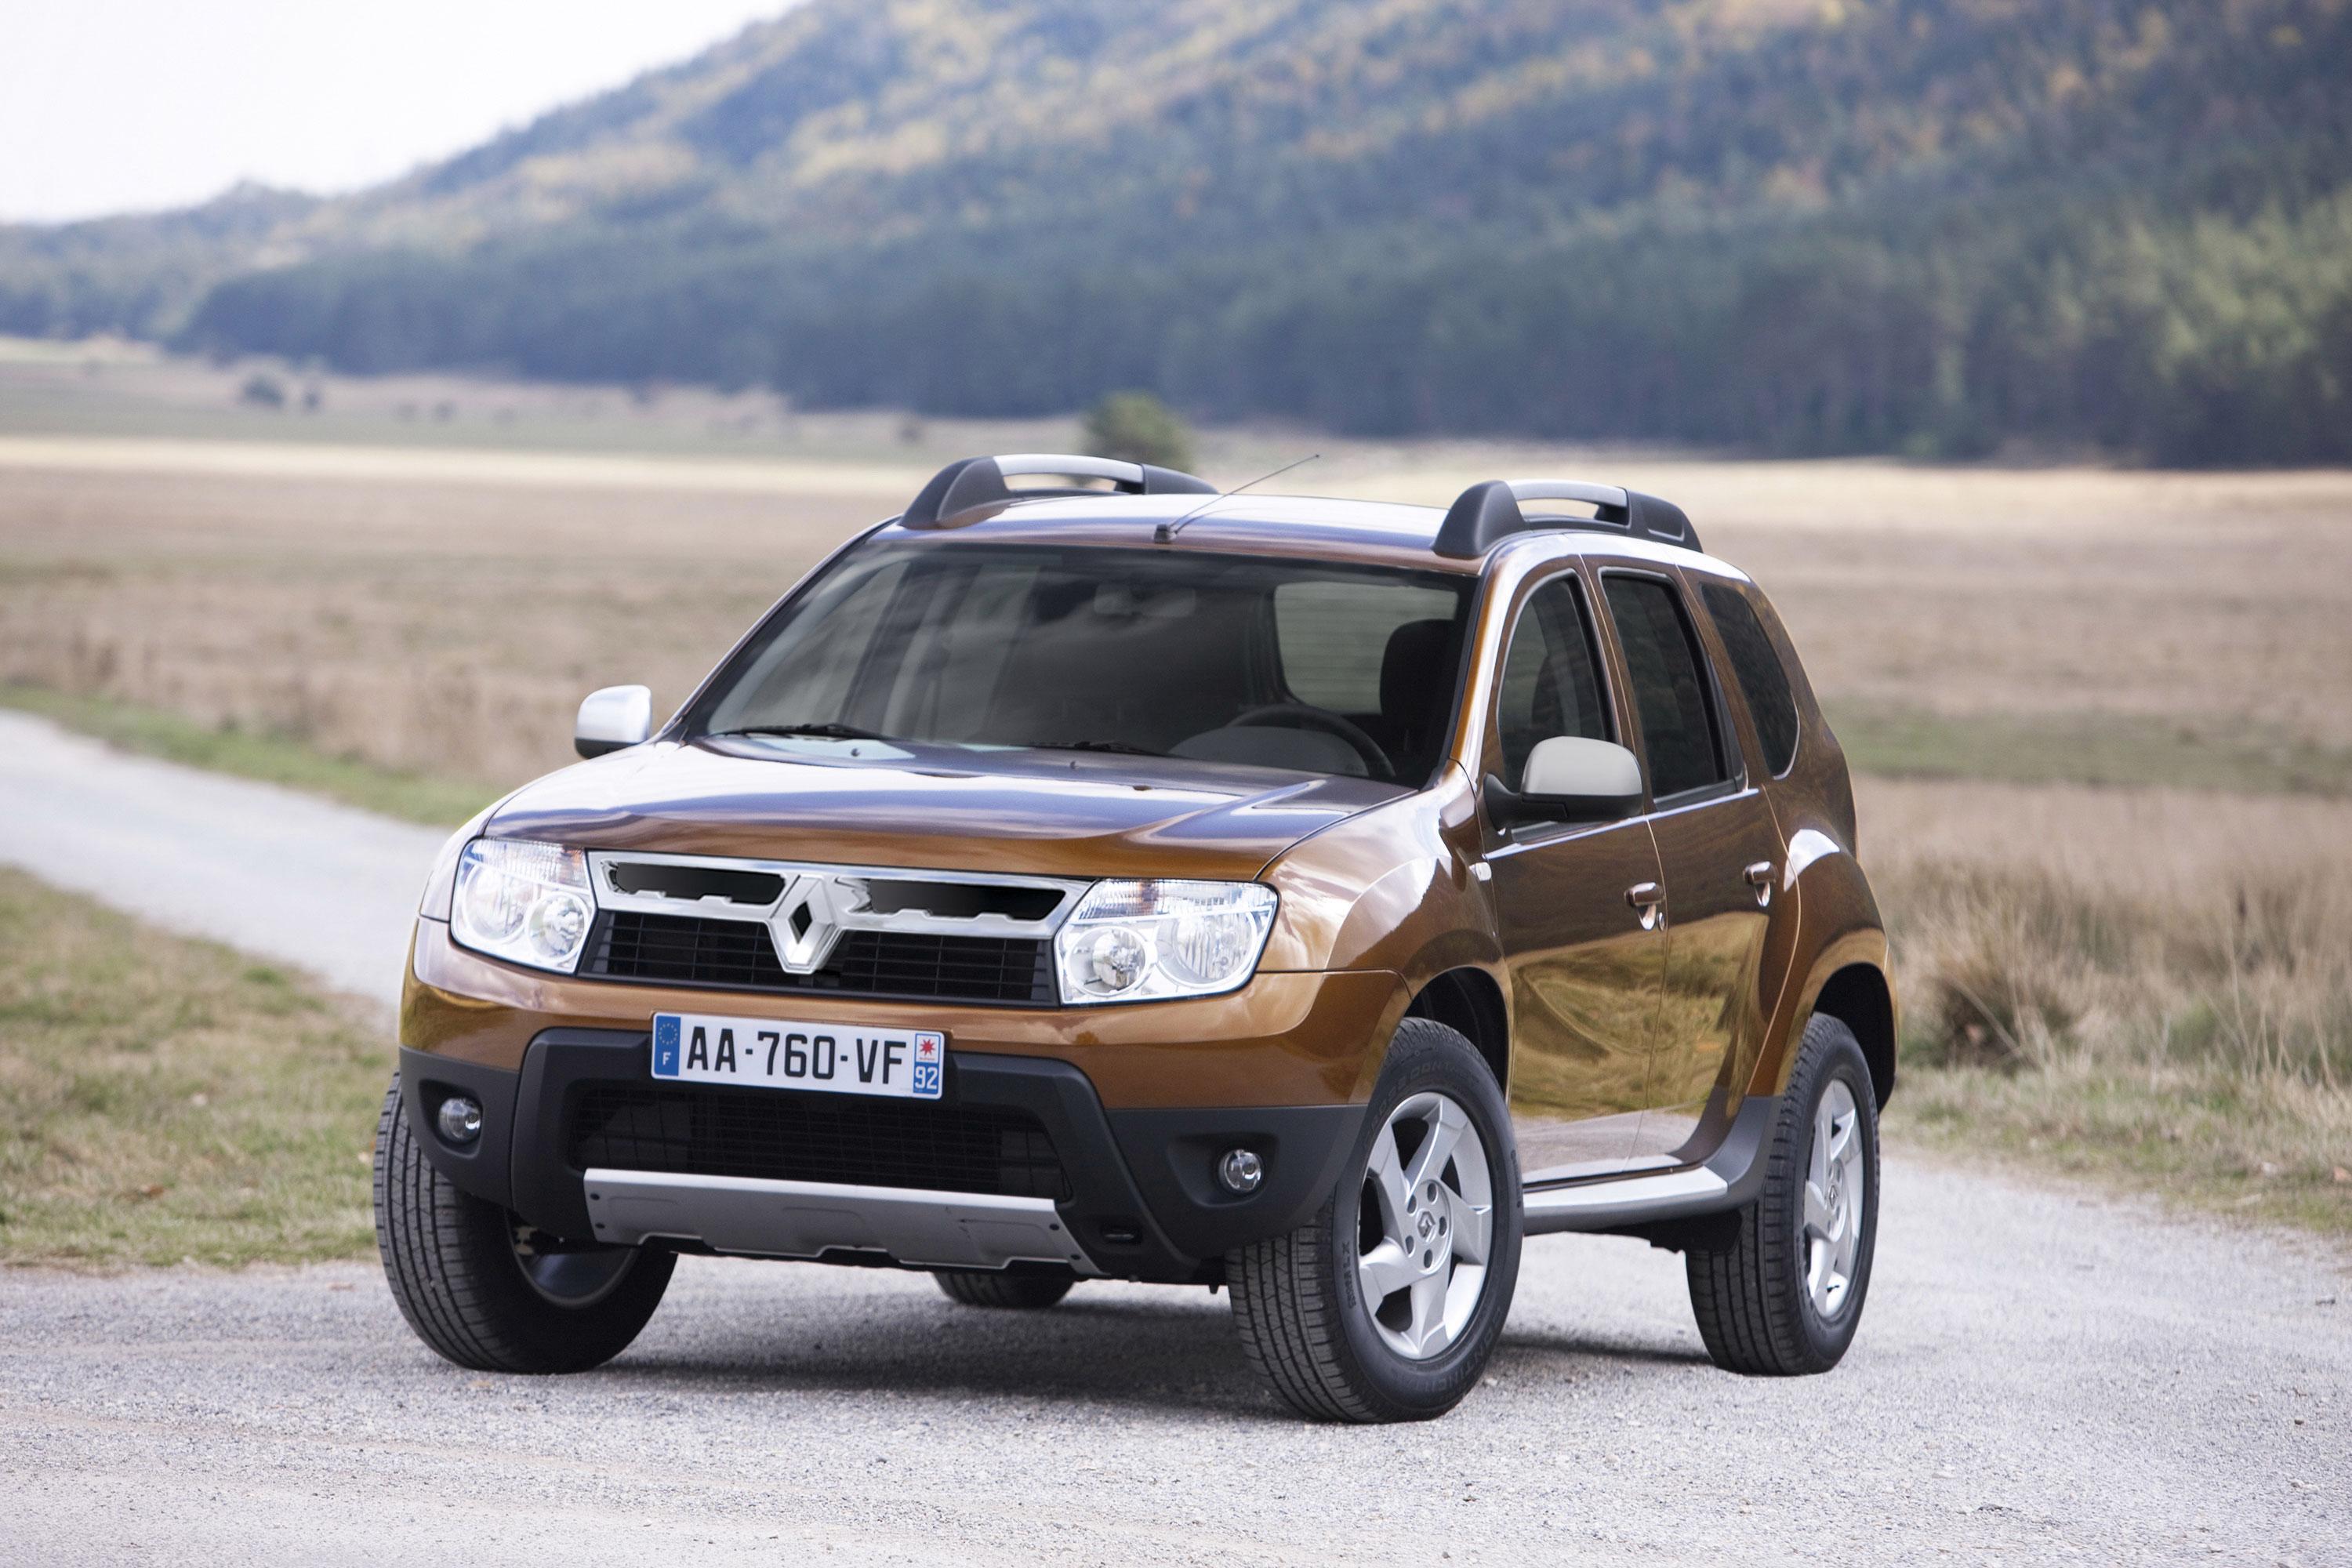 Дастер 4wd 2.0. Renault Duster 2010. Duster Renault Duster. Renault Duster 1. Renault Duster 2000.